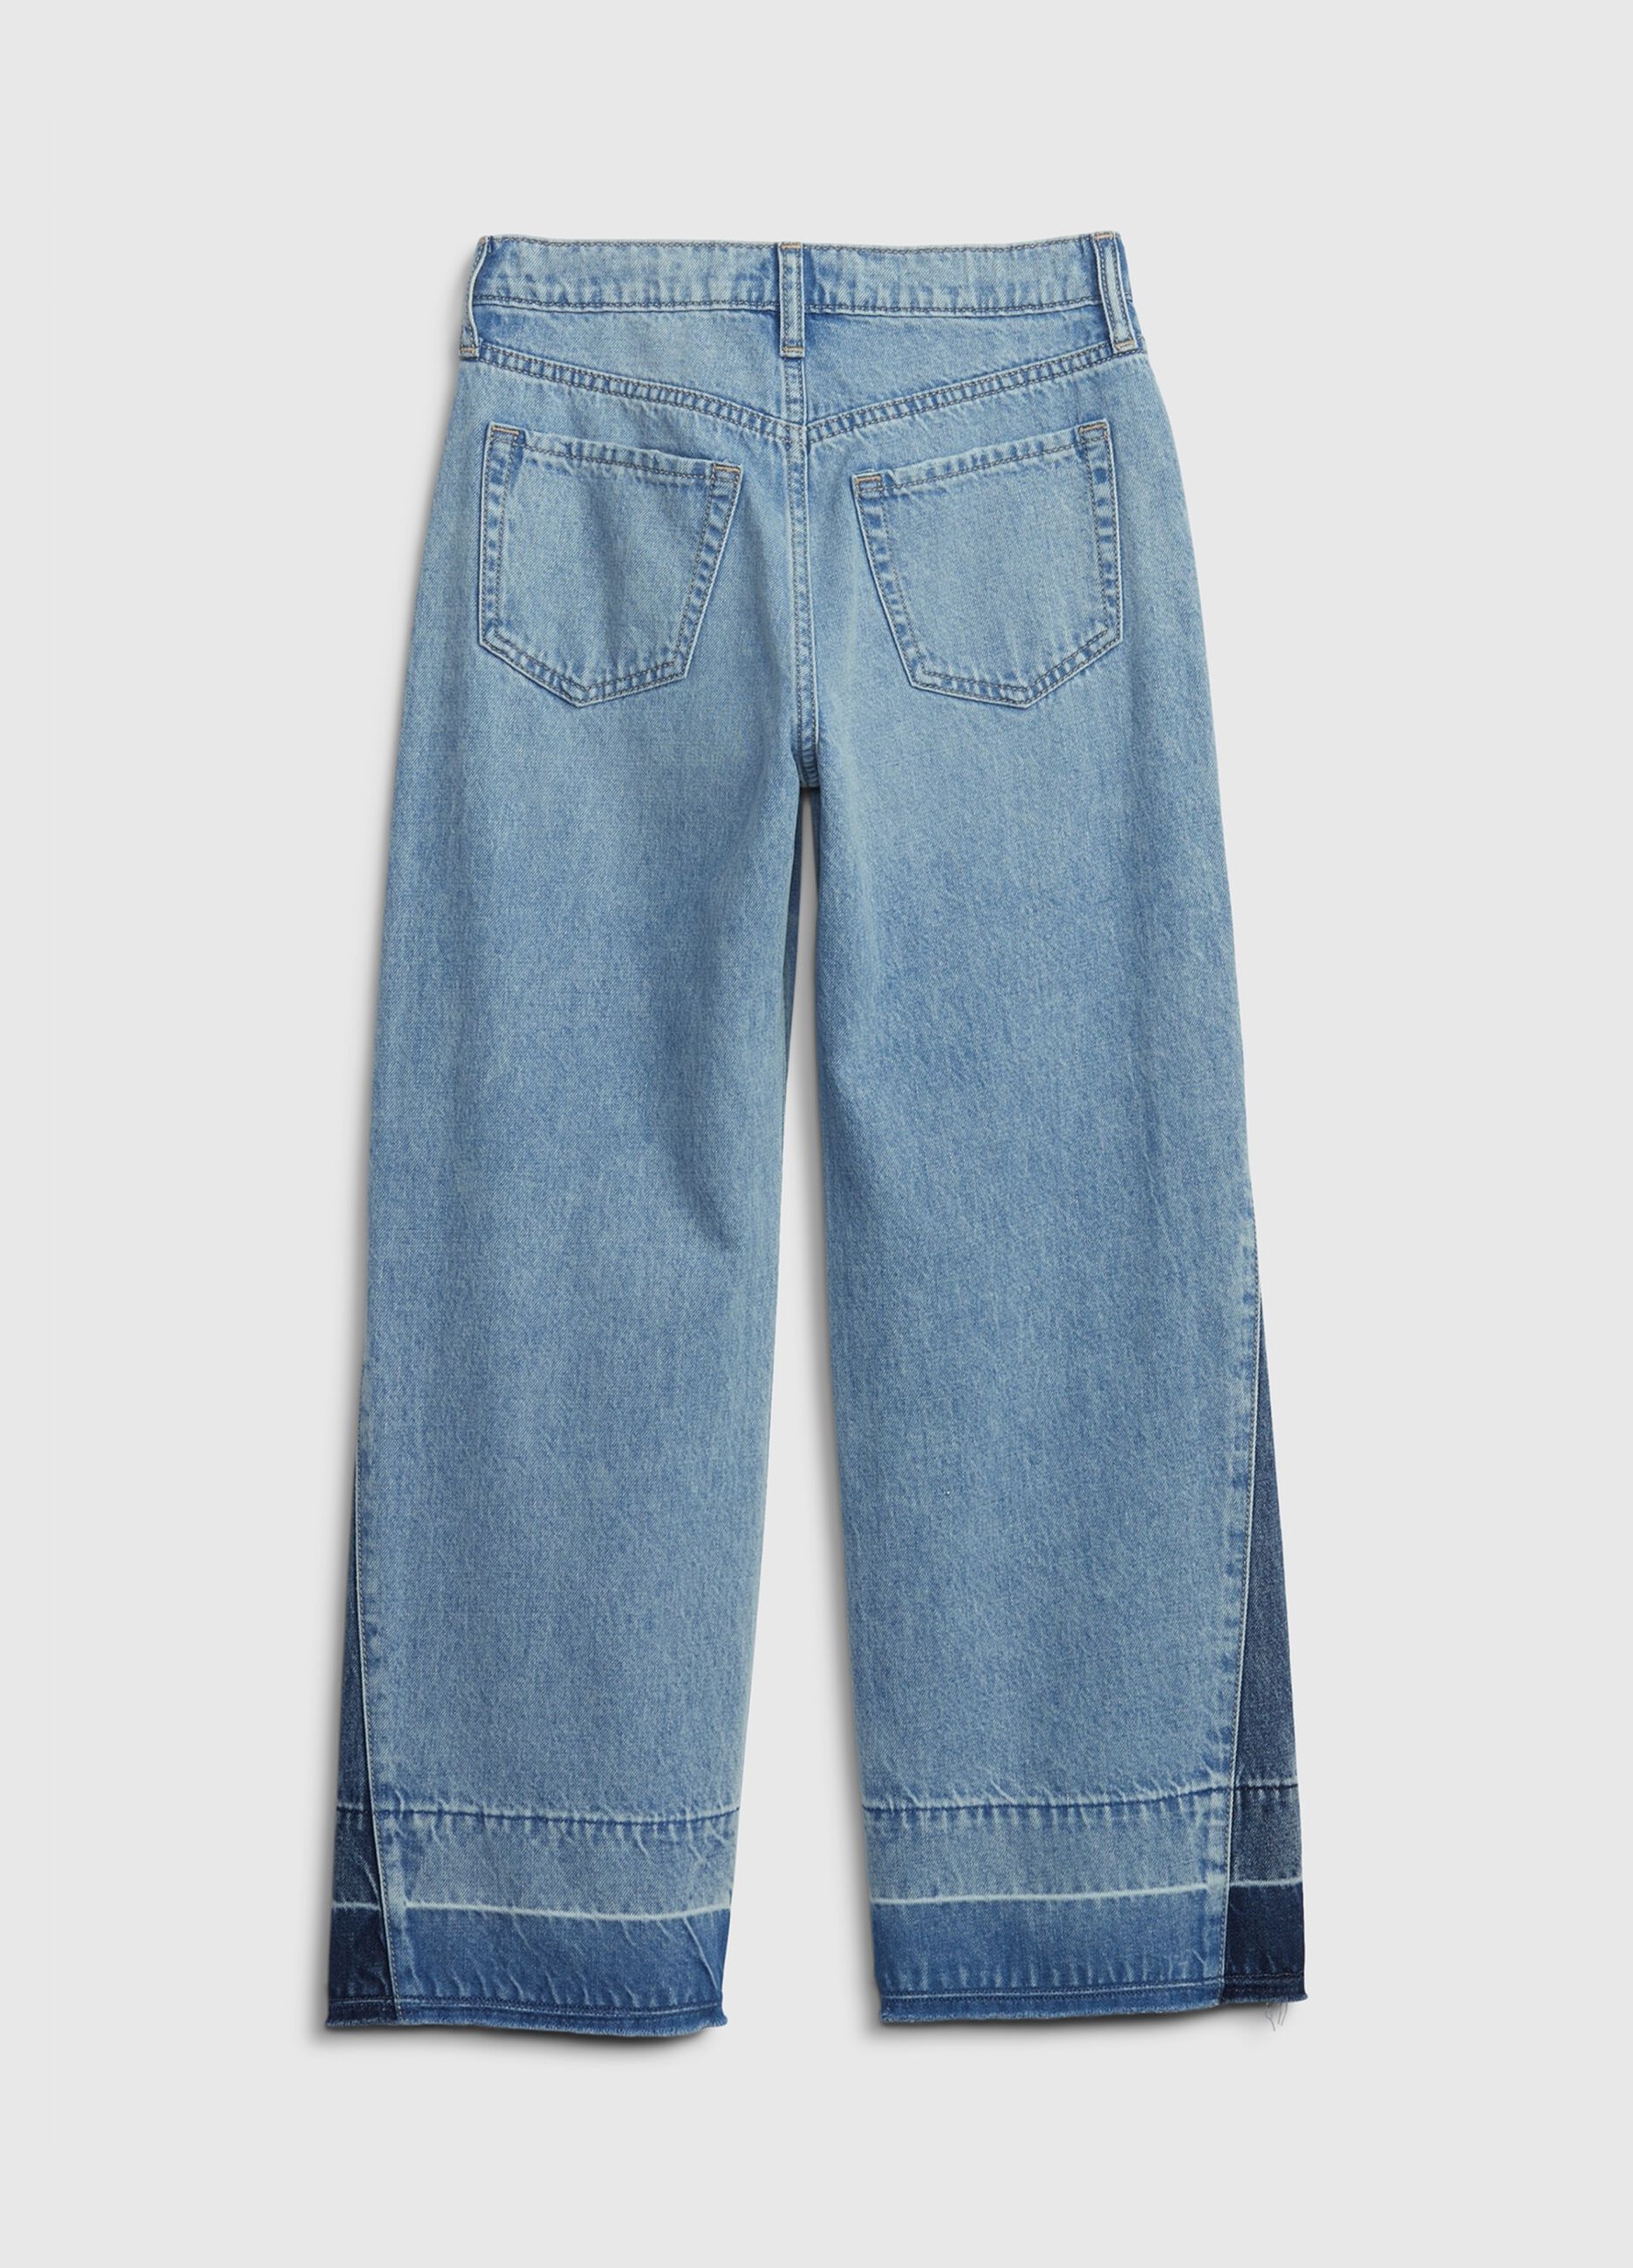 Low stride jeans with contrasting inserts